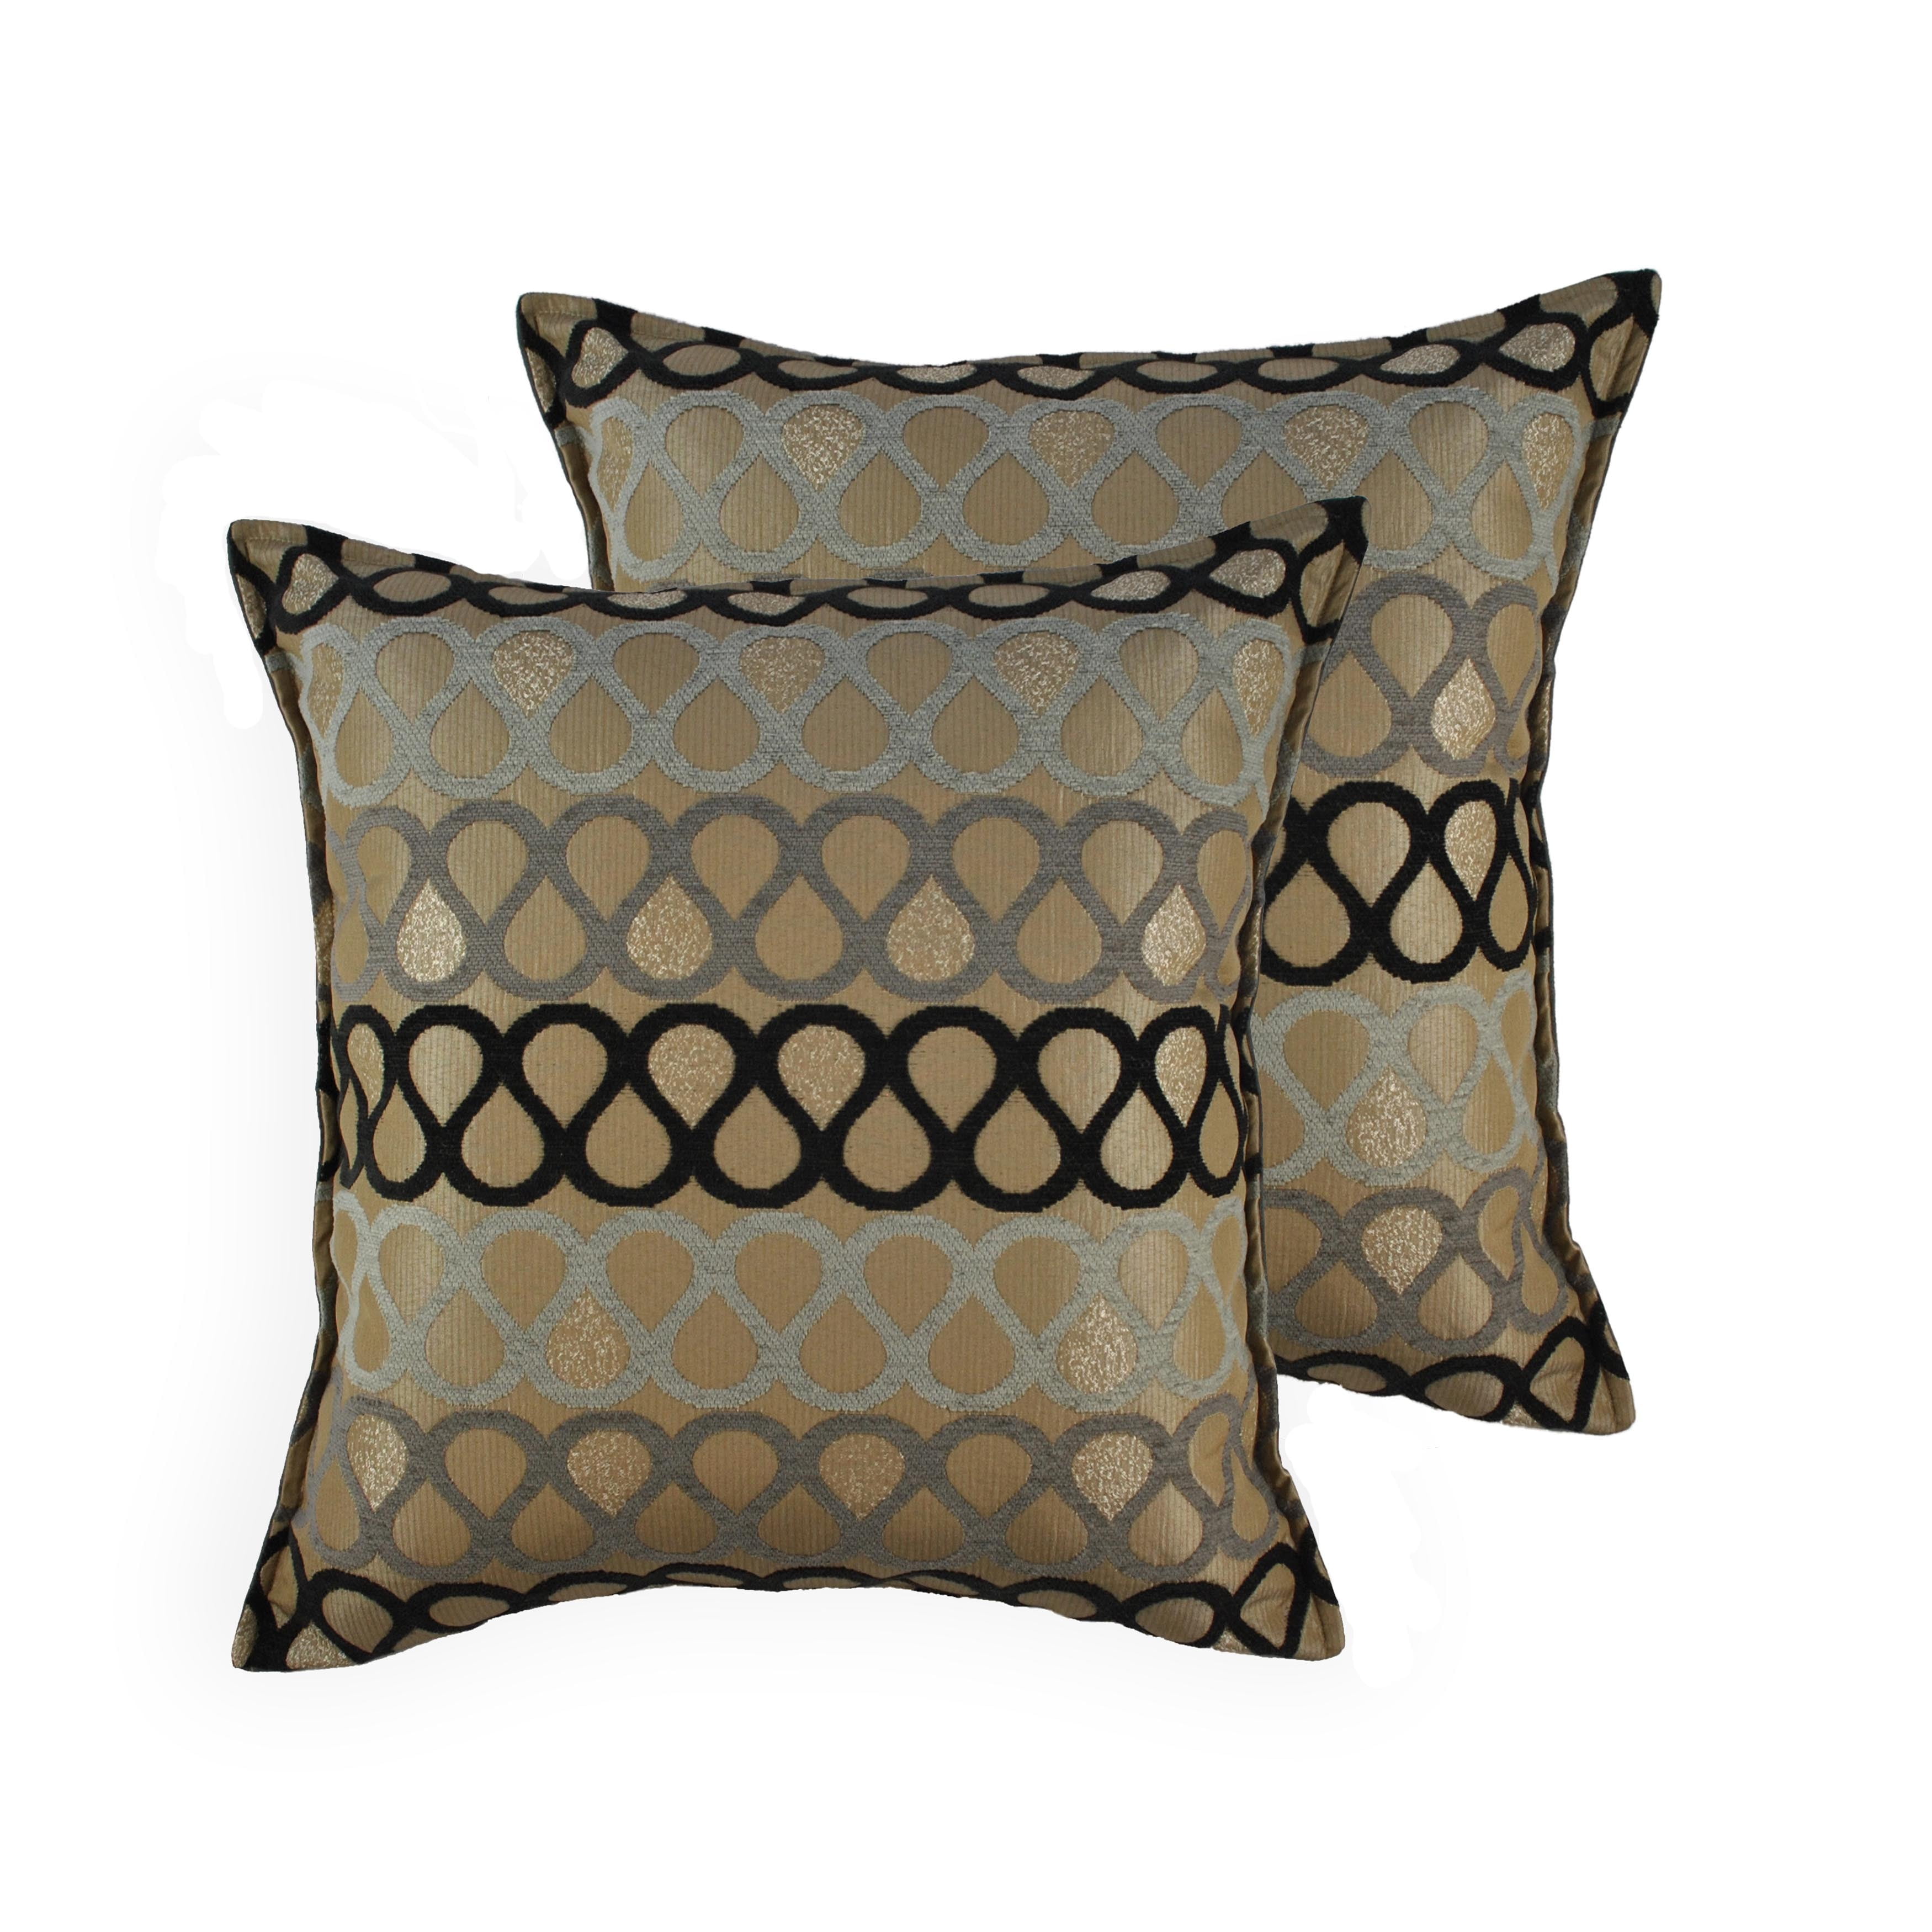 Croscill Calice Square Toss Pillow Embroidered Black Gold Tassel 